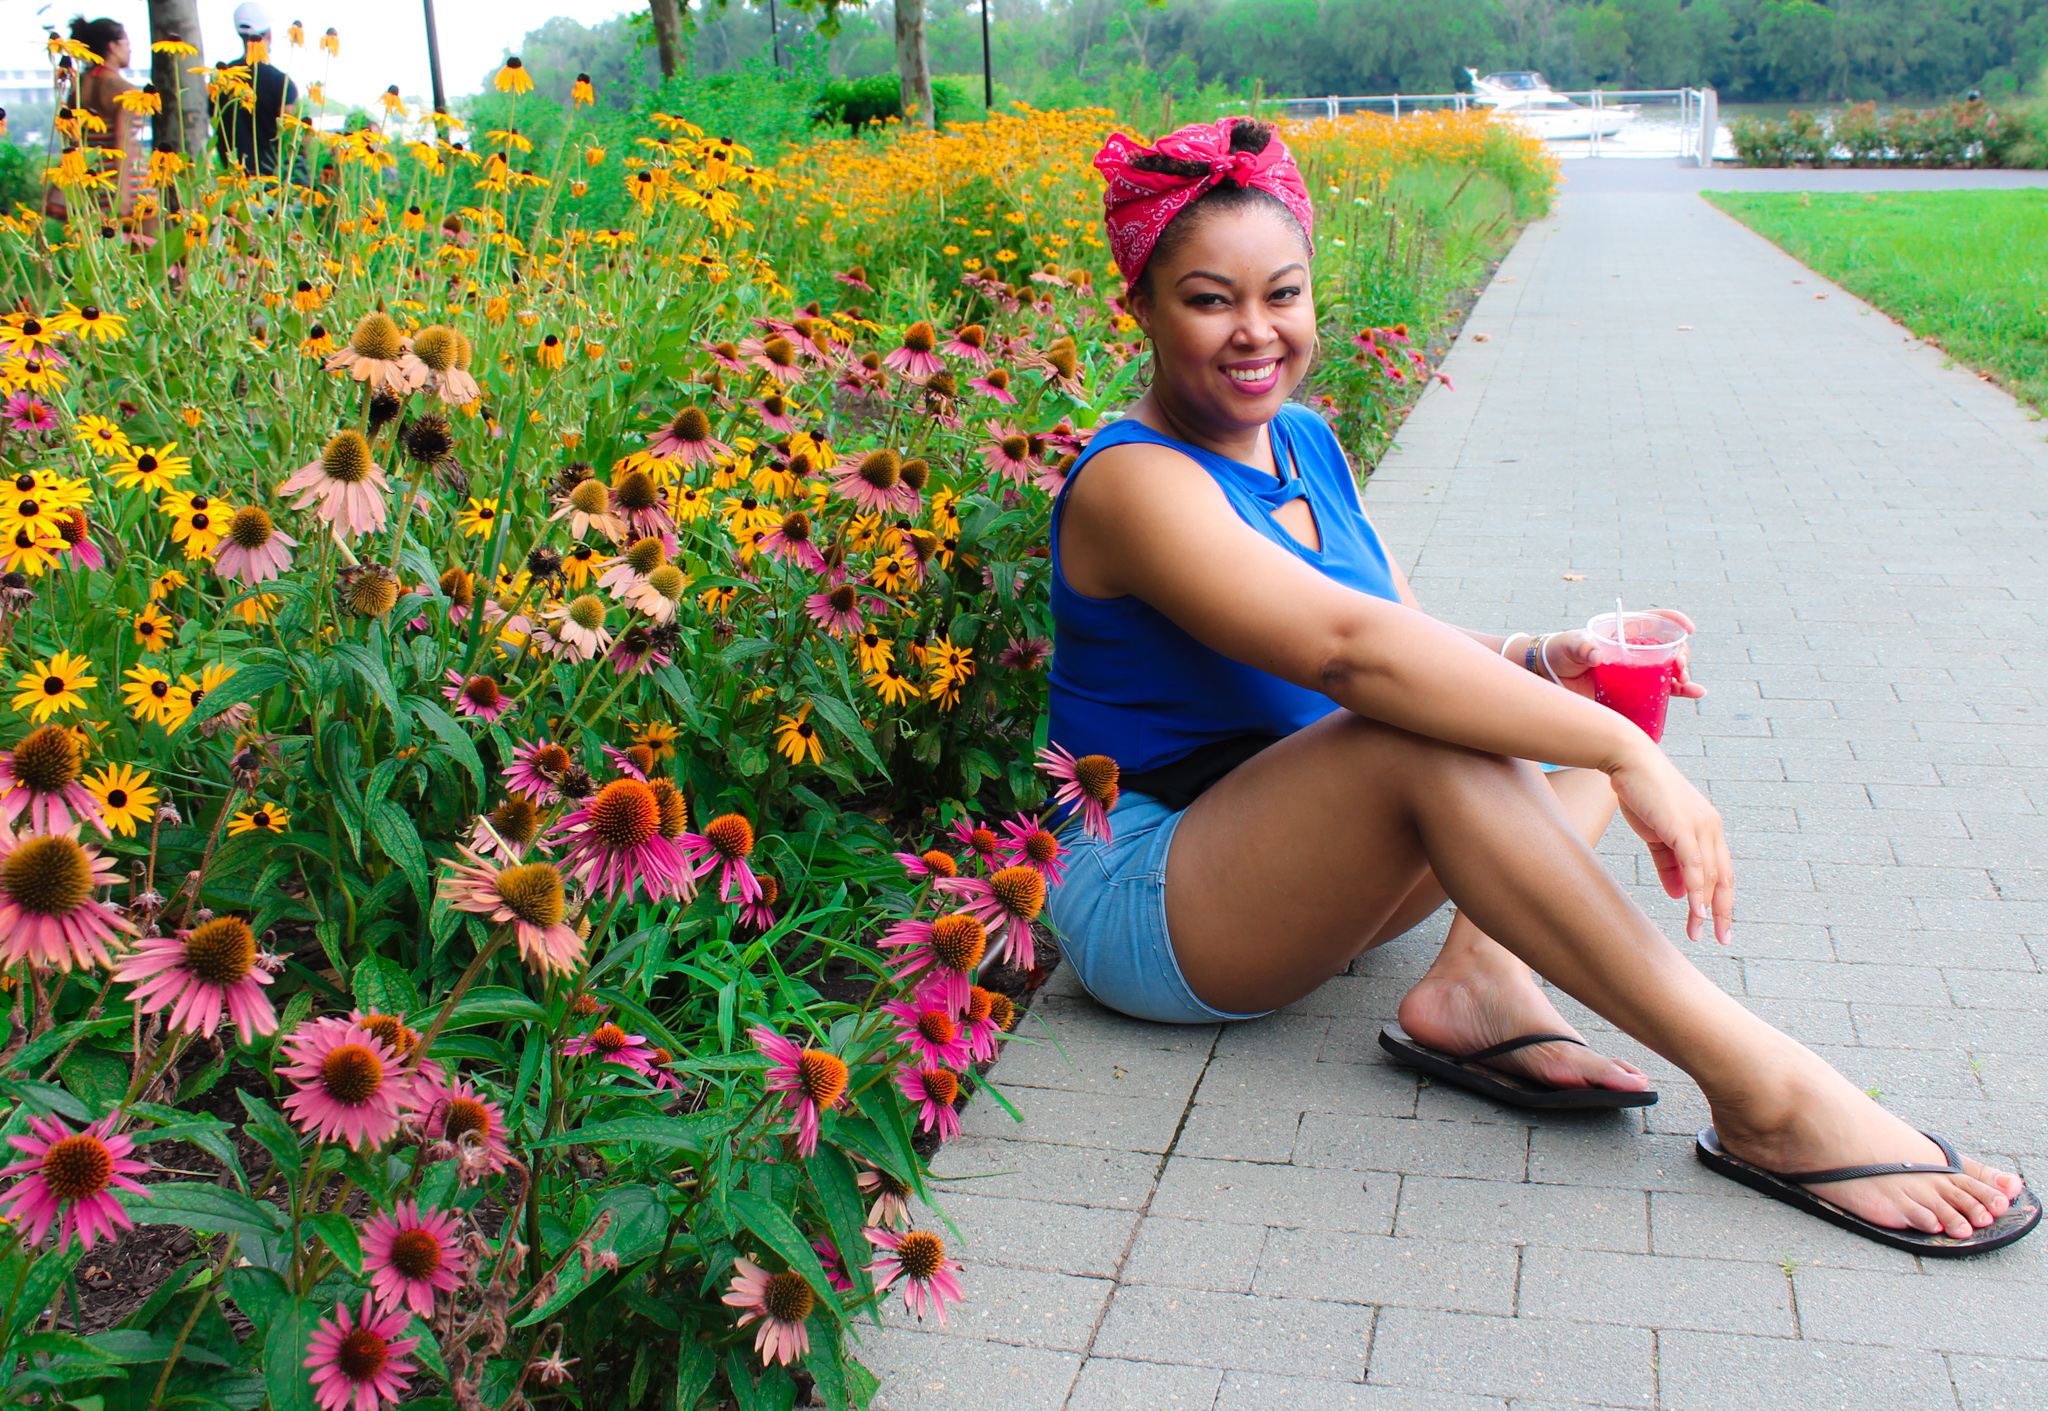 DC blogger Rogan Smith of This Bahamian Gyal sits among flowers in Georgetown, DC